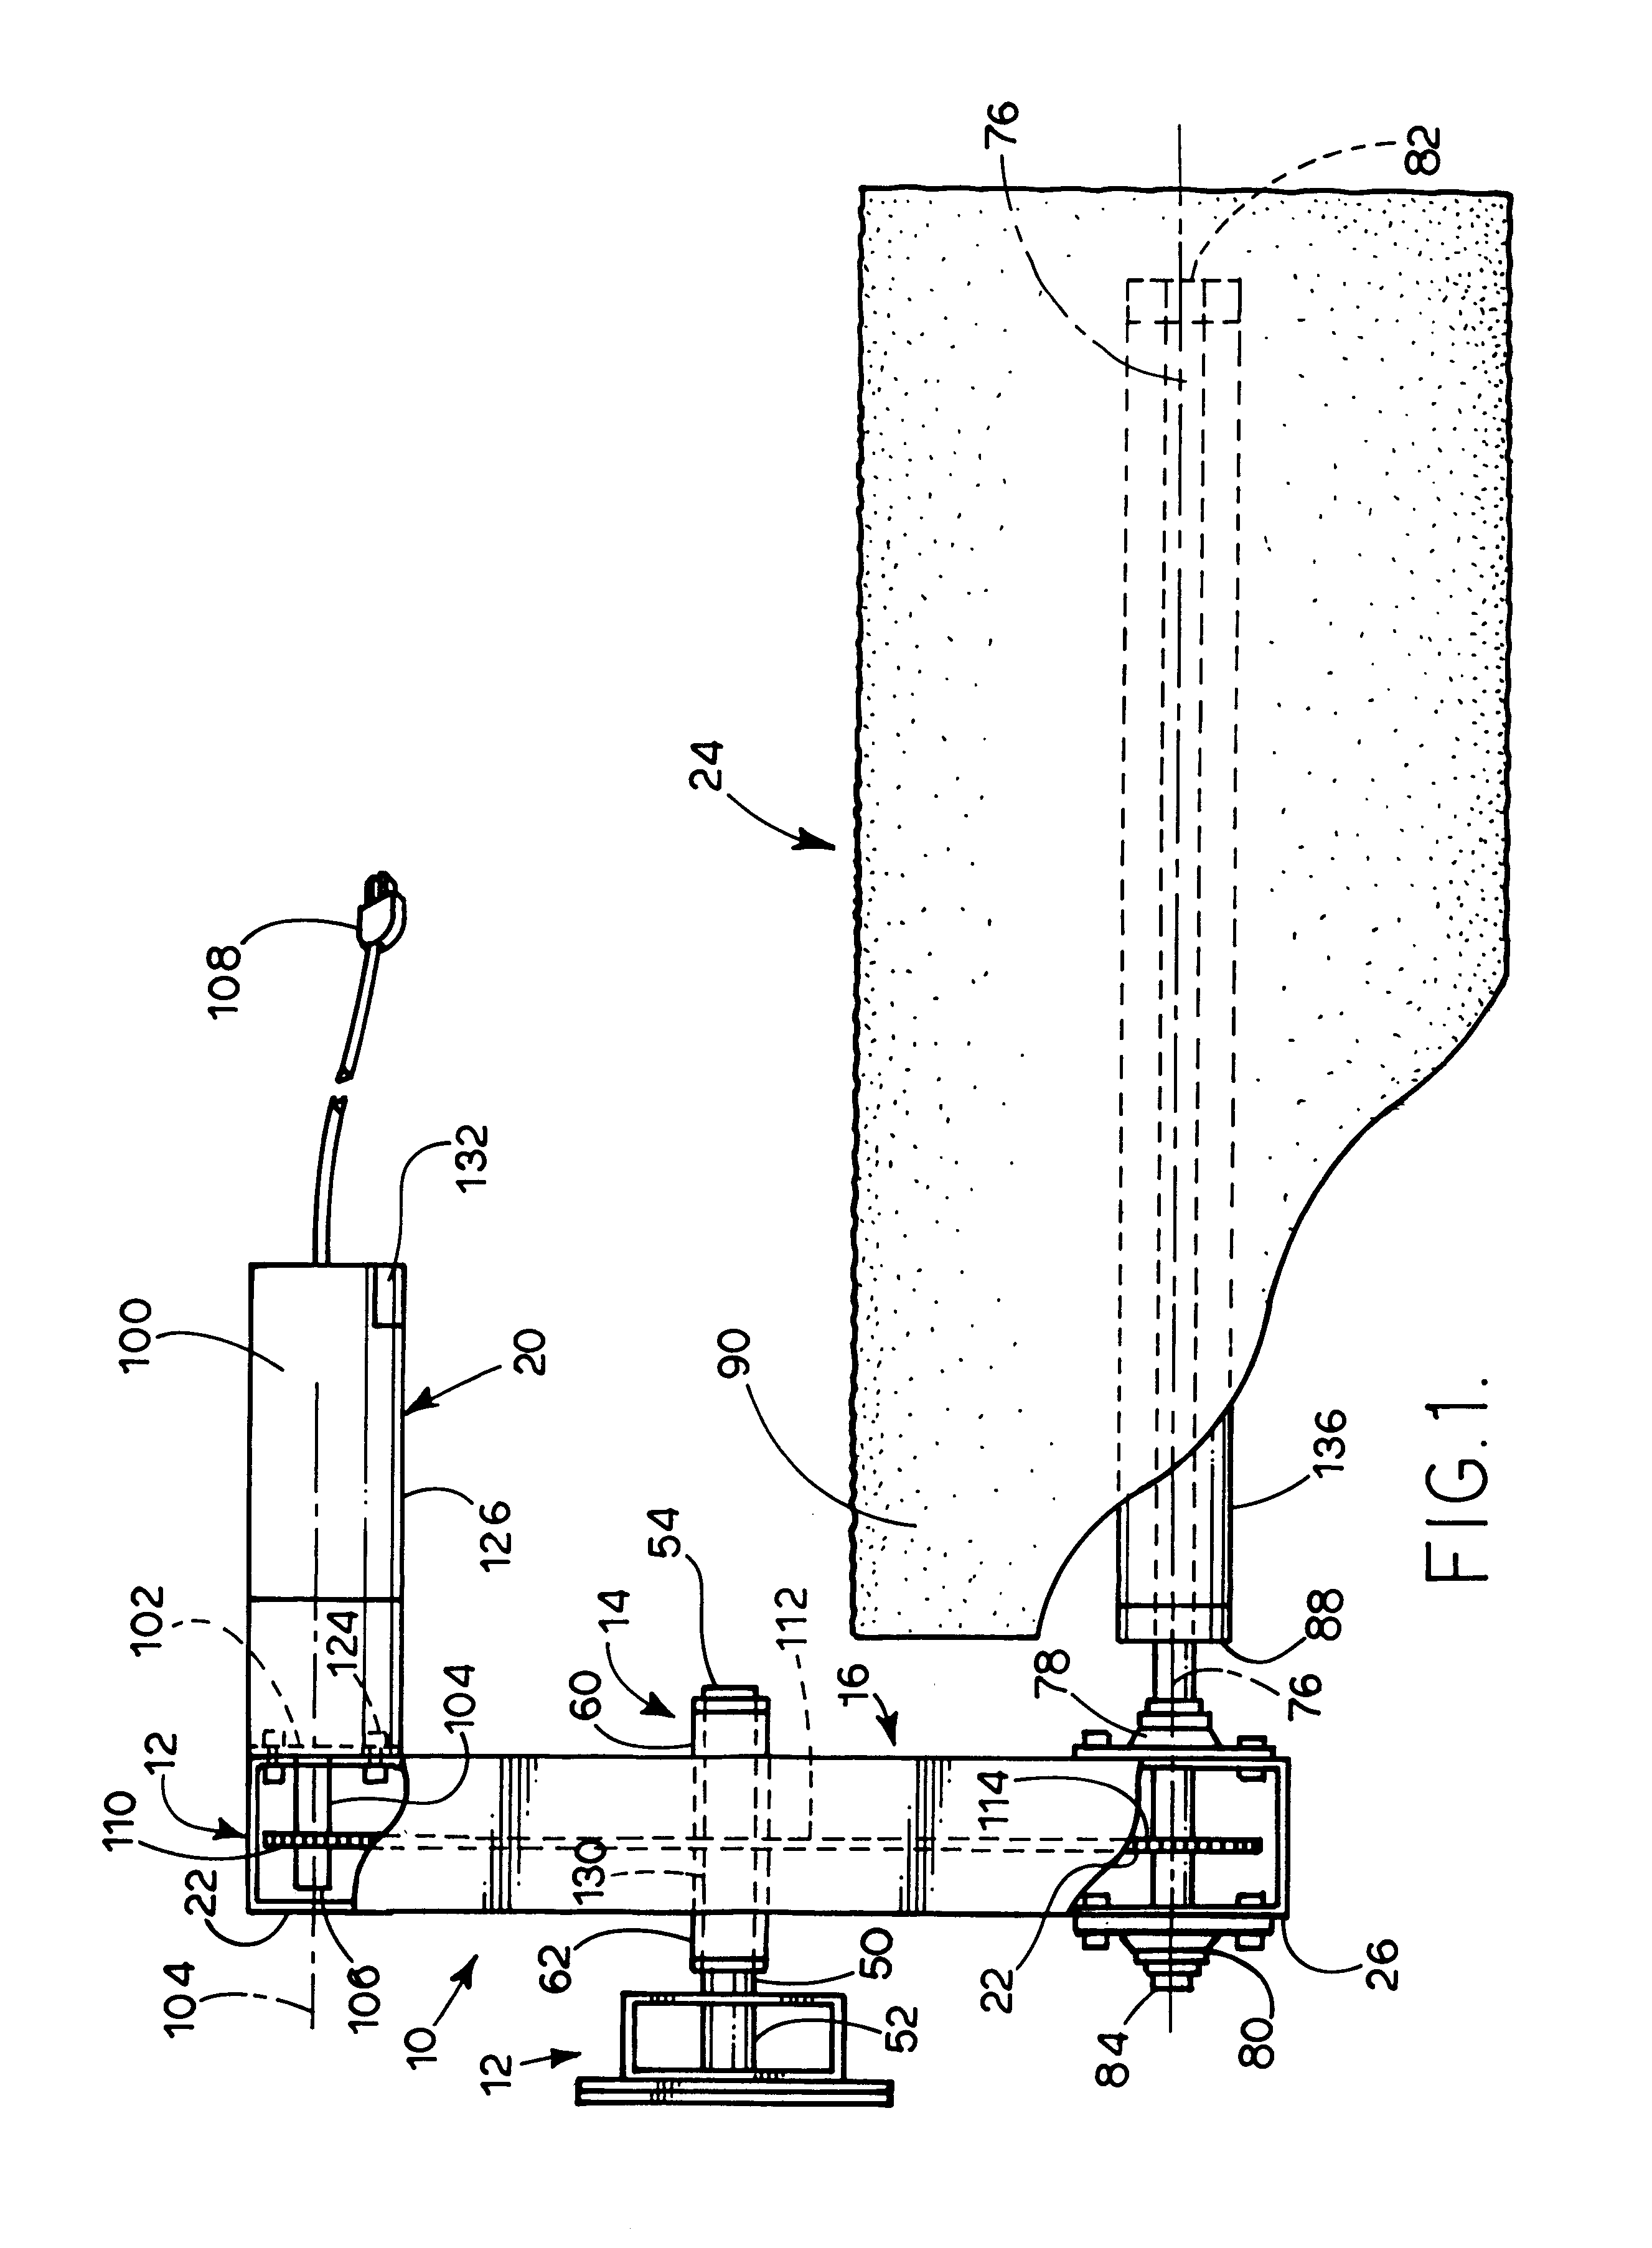 Automatic, on-demand, self-adjusting brushing system for use with large animals, such as cows